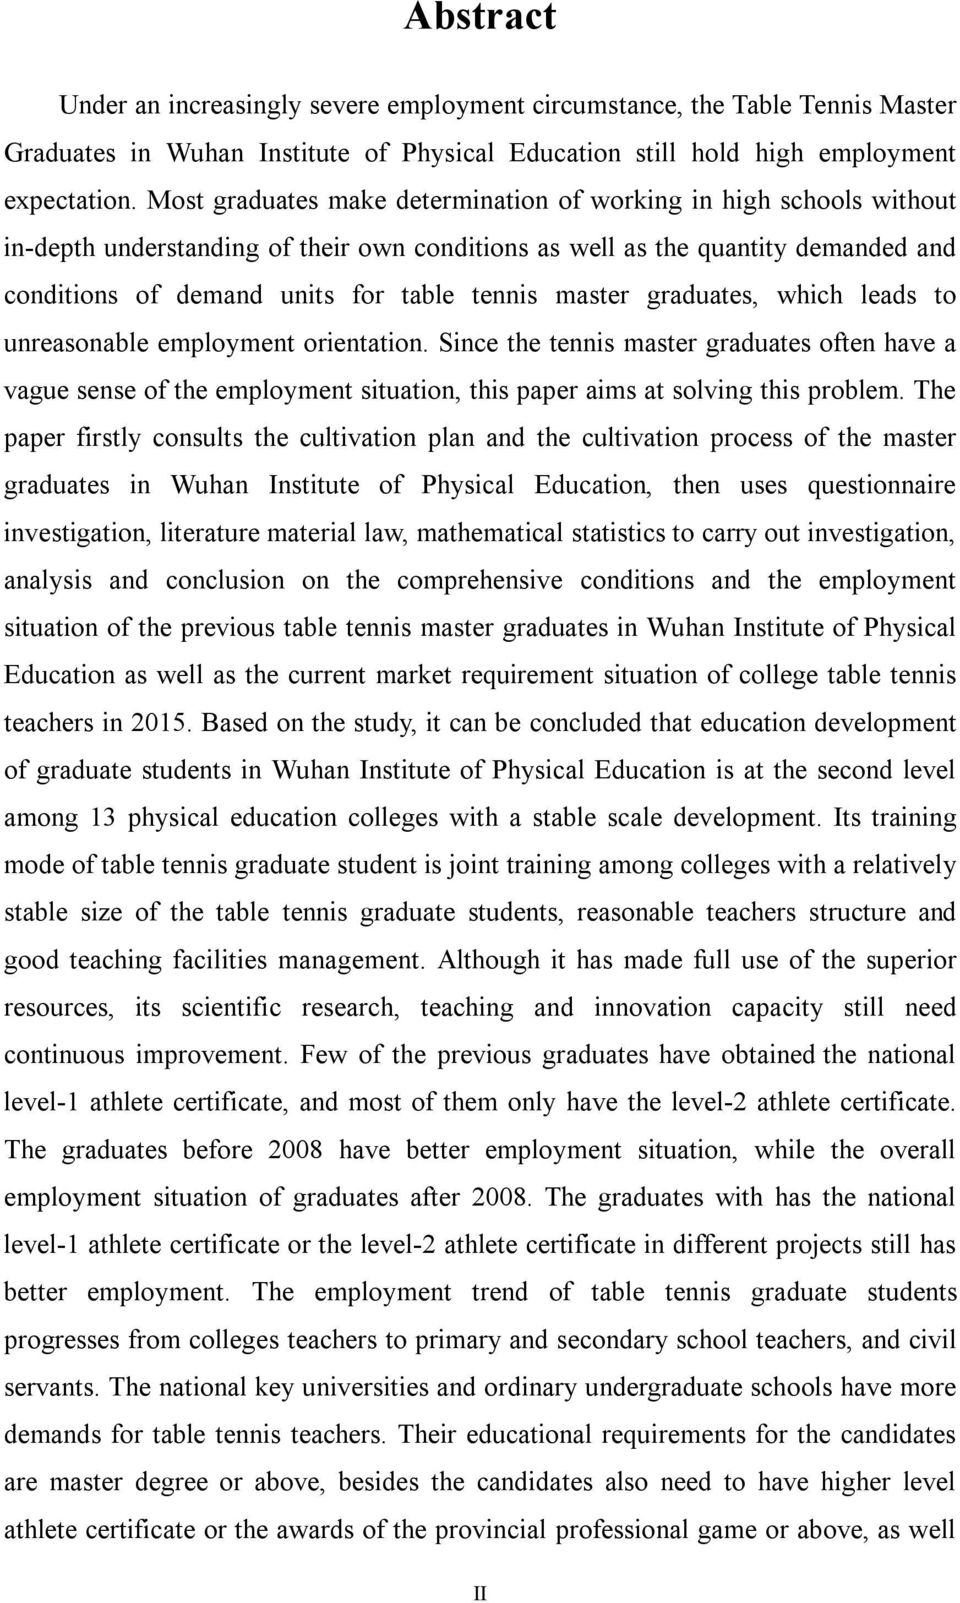 master graduates, which leads to unreasonable employment orientation. Since the tennis master graduates often have a vague sense of the employment situation, this paper aims at solving this problem.